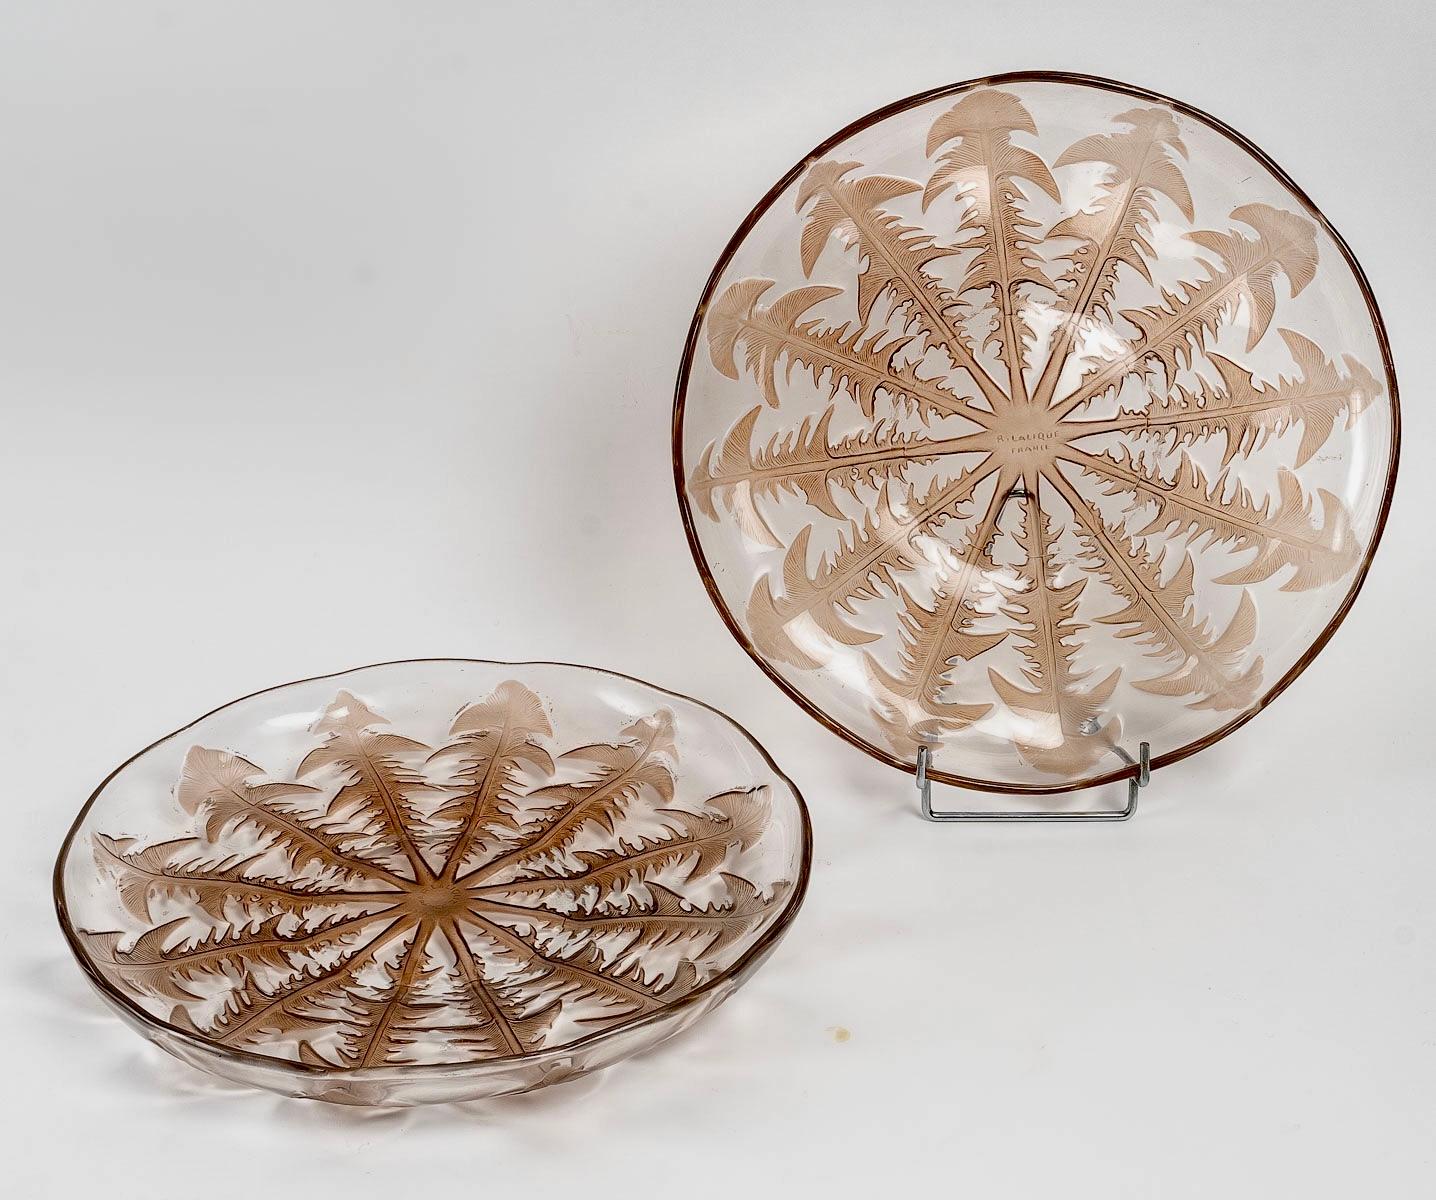 Pair of plates, dishes 